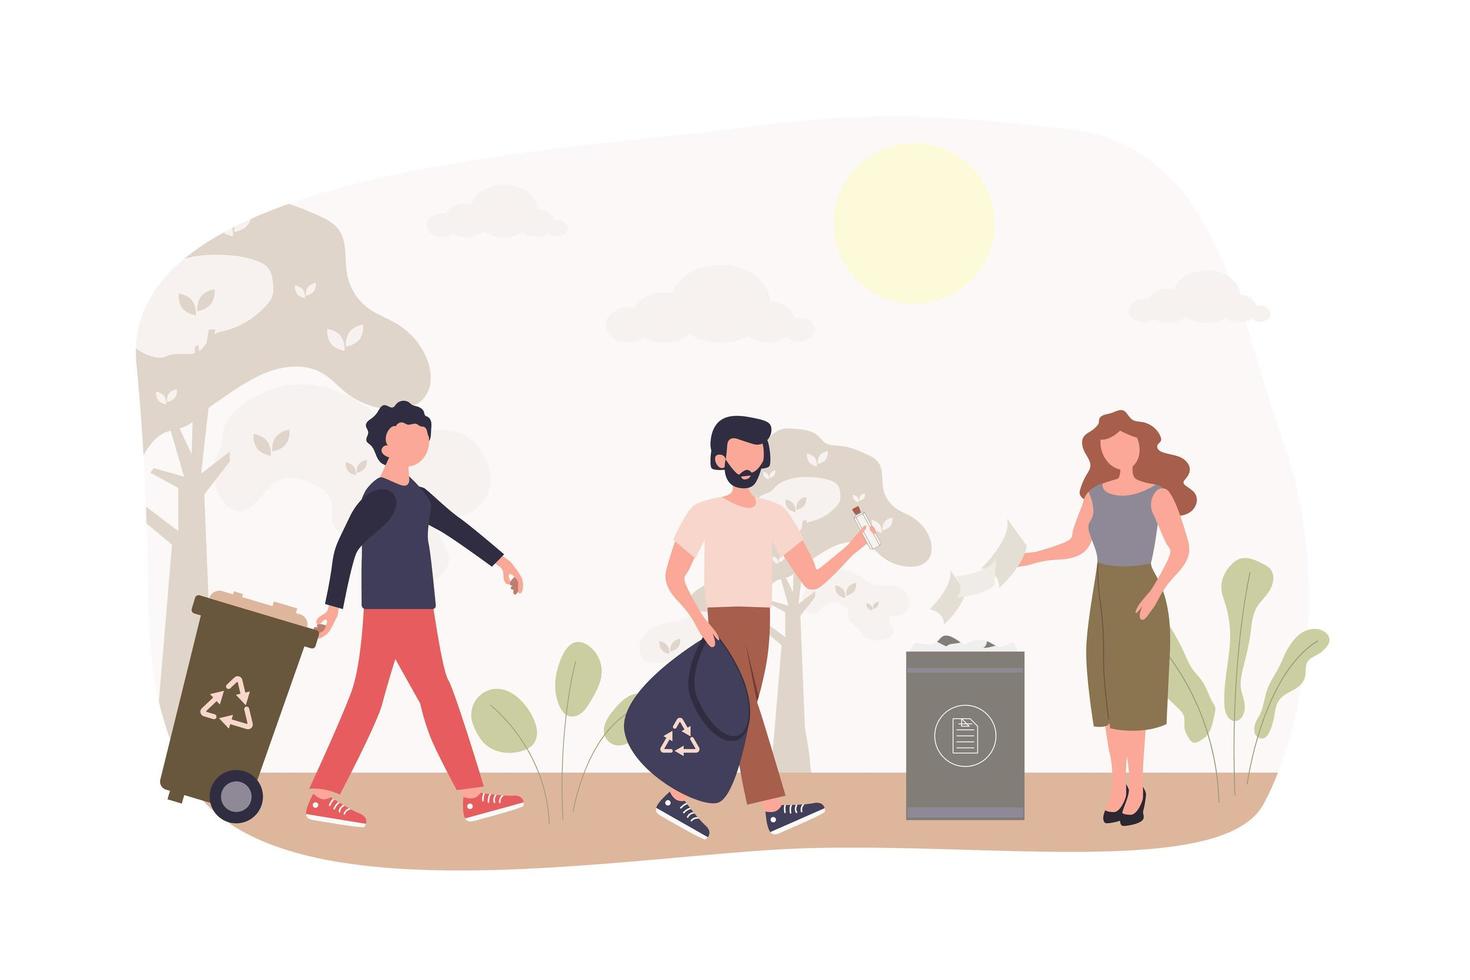 Waste recycling and environmental protection modern flat concept. People collect garbage in bins and bags and hand it over for reuse service. Vector illustration with human scene for web banner design